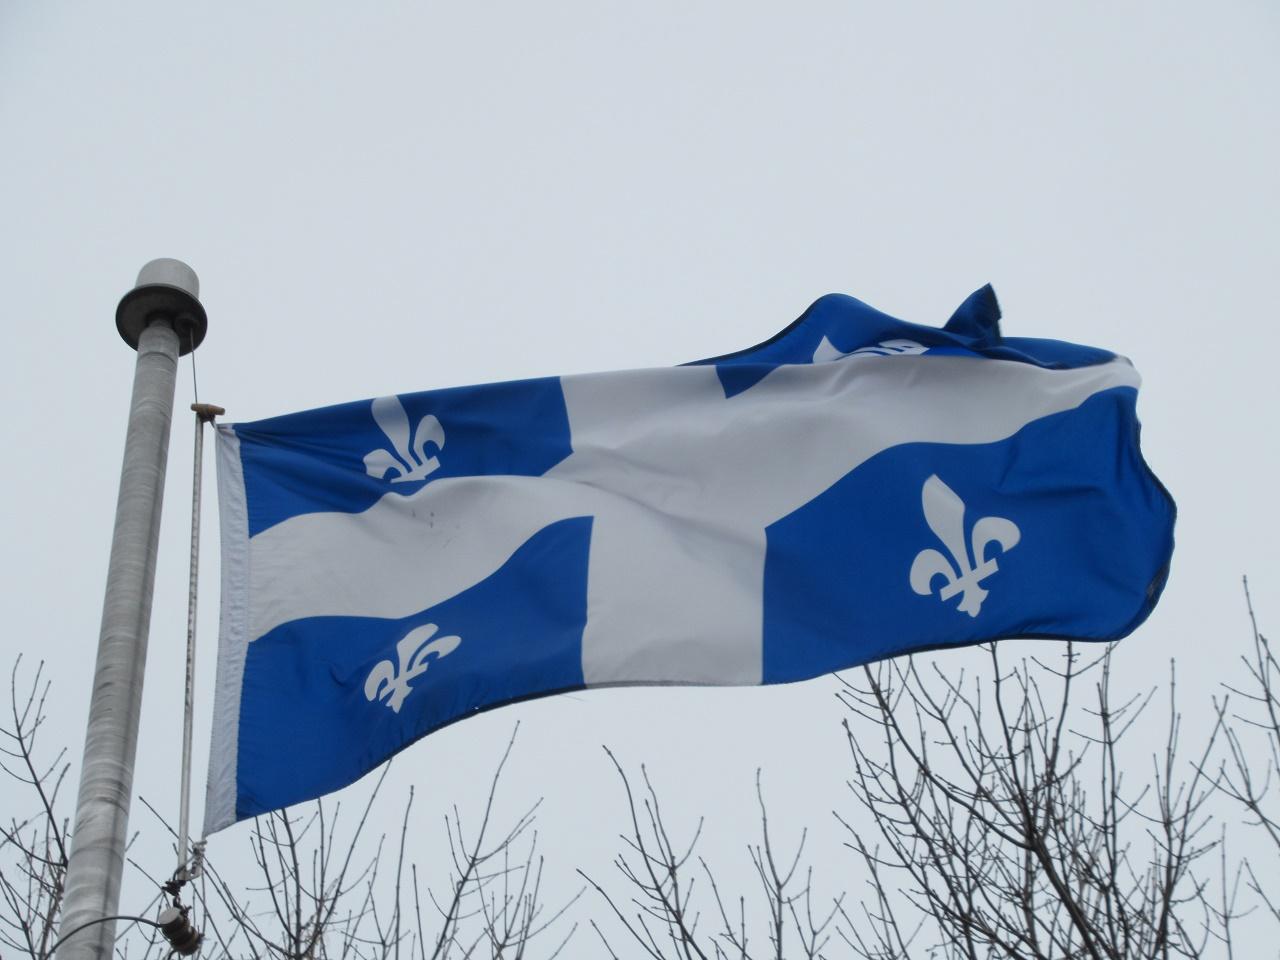 Québec has nearly 8,000 COVID-19 cases, Premier extends business closures to May 4